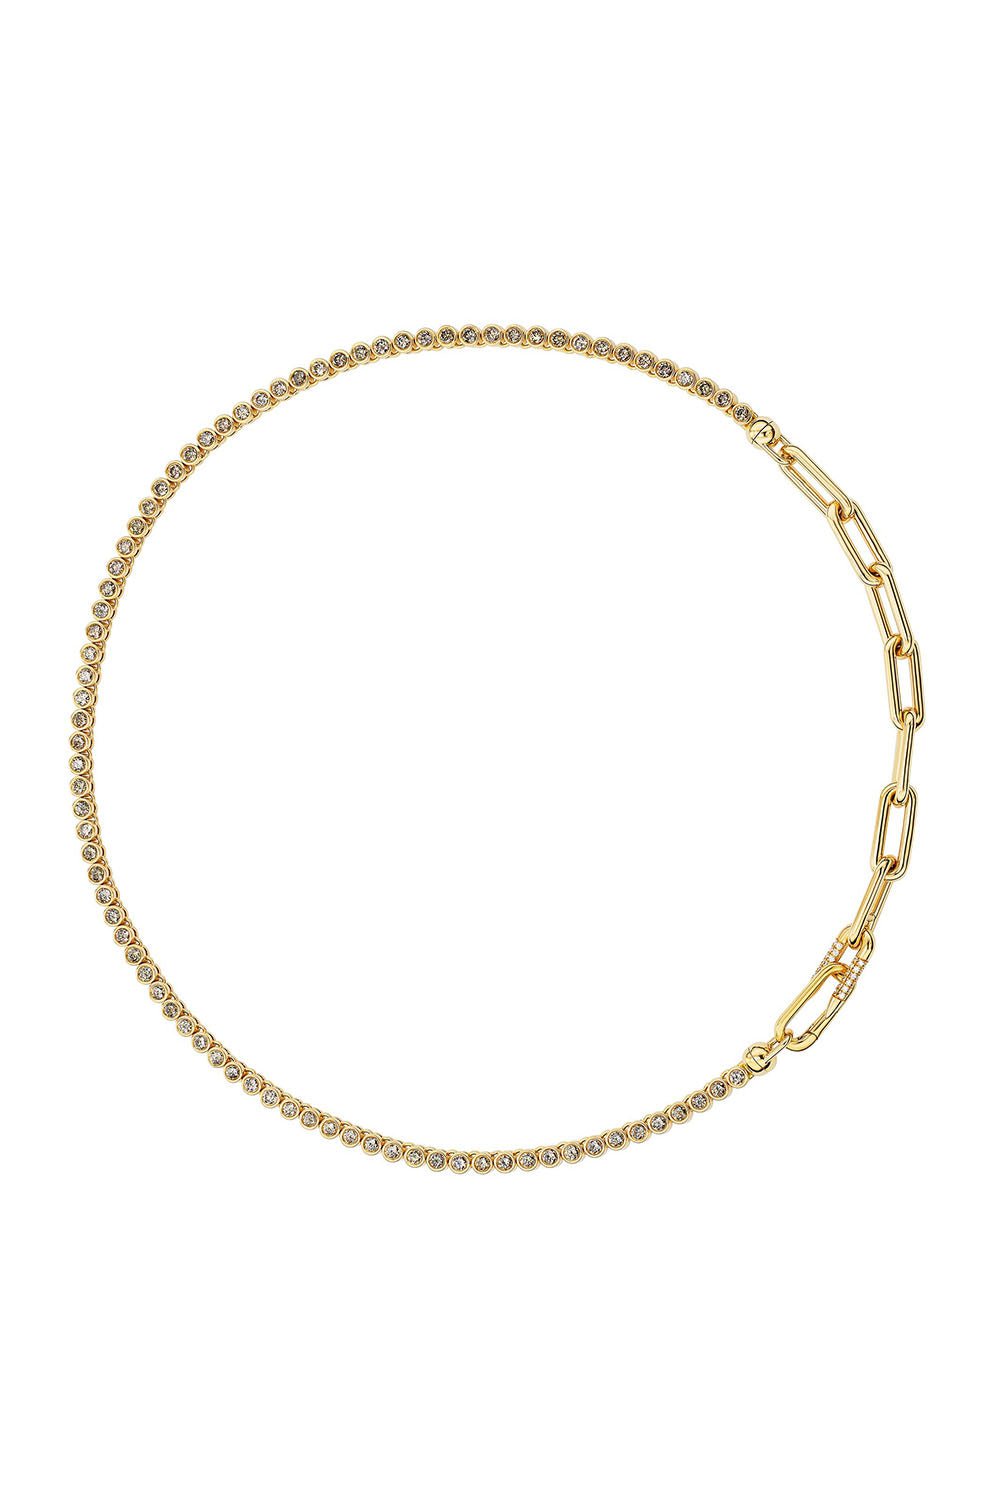 UNIFORM OBJECT-Heavy Metal Tennis Necklace-YELLOW GOLD